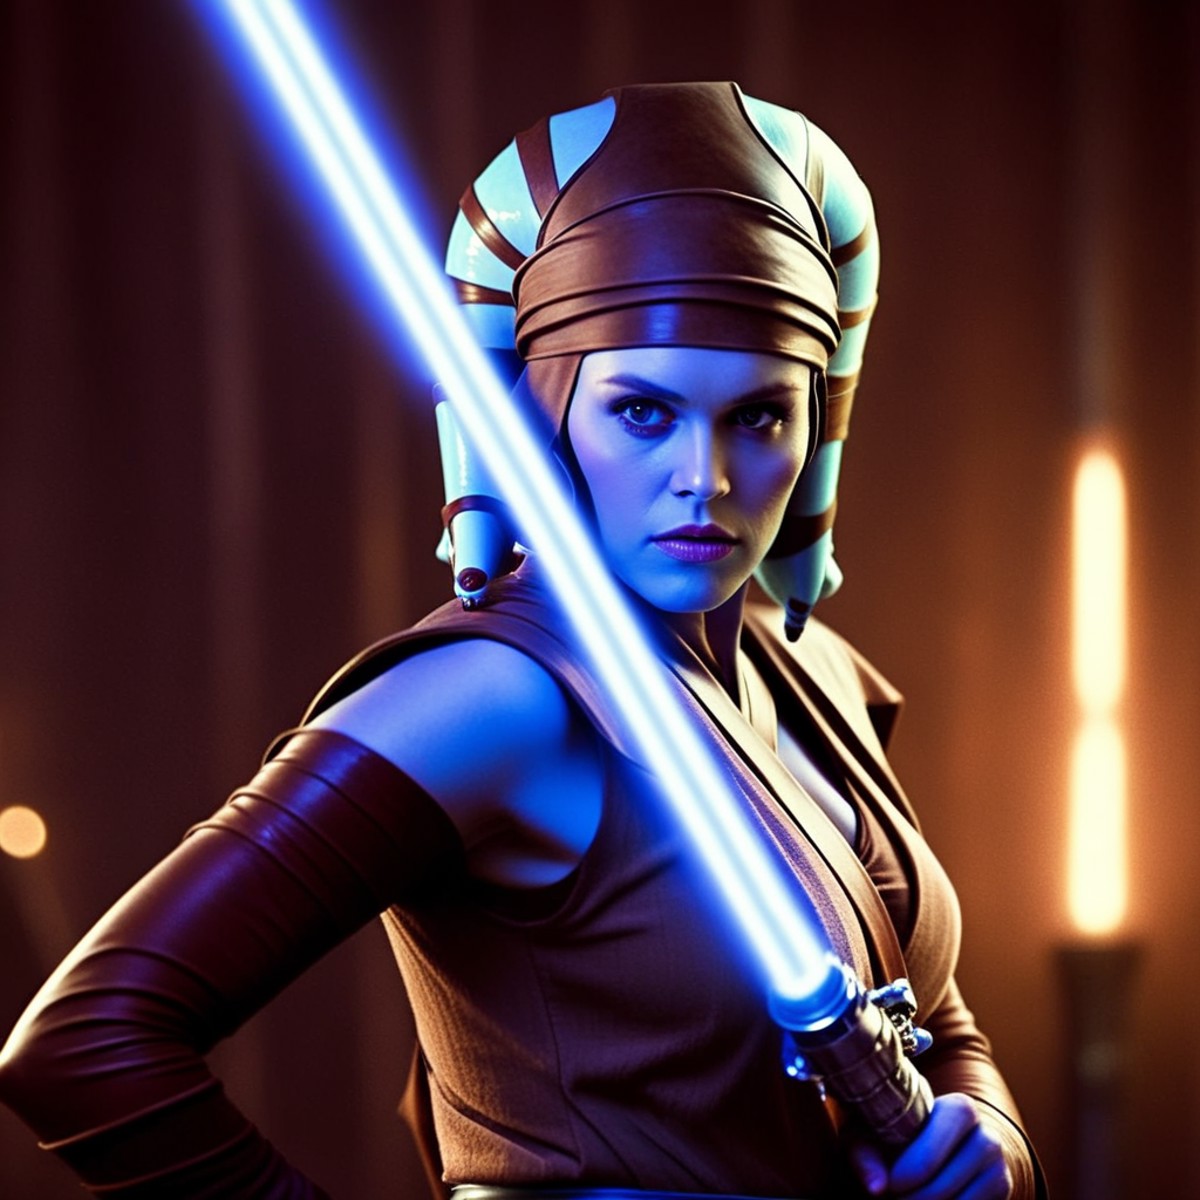 cinematic film still of <lora:Aayla Secura:1.5>
Aayla Secura a blue skin color woman in a star wars outfit holding a light...